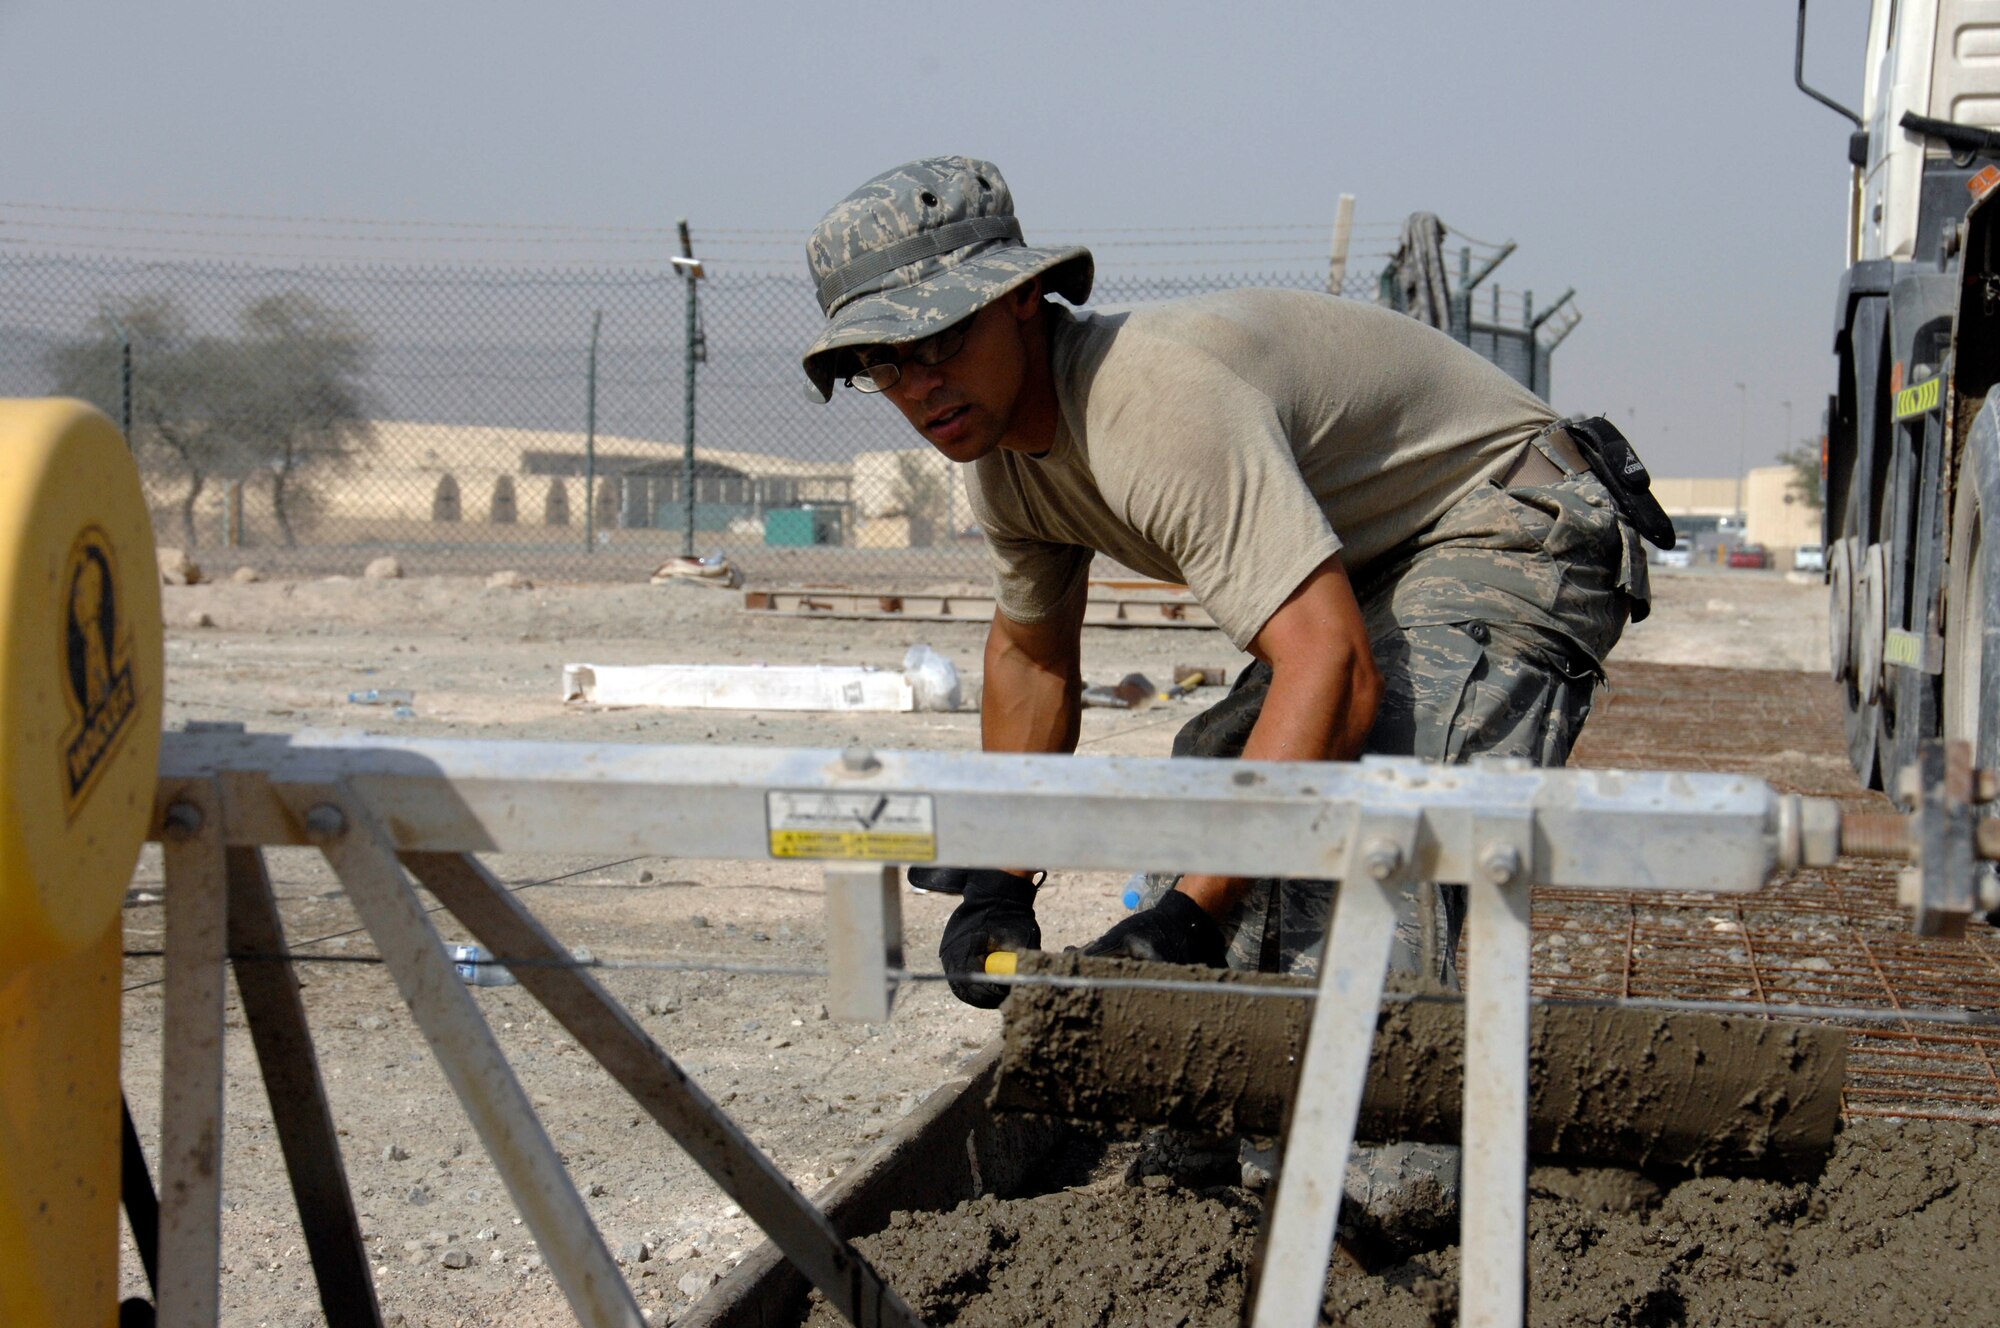 SOUTHWEST ASIA -- Airman 1st Class Francisco Bautista, from the 380th Expeditionary Civil Engineering Squadron, smooths concrete for the foundation of a new gym here. This is Airman Bautista's first deployment. (U.S. Air Force photo by Staff Sgt. Mike Andriacco) (Released)